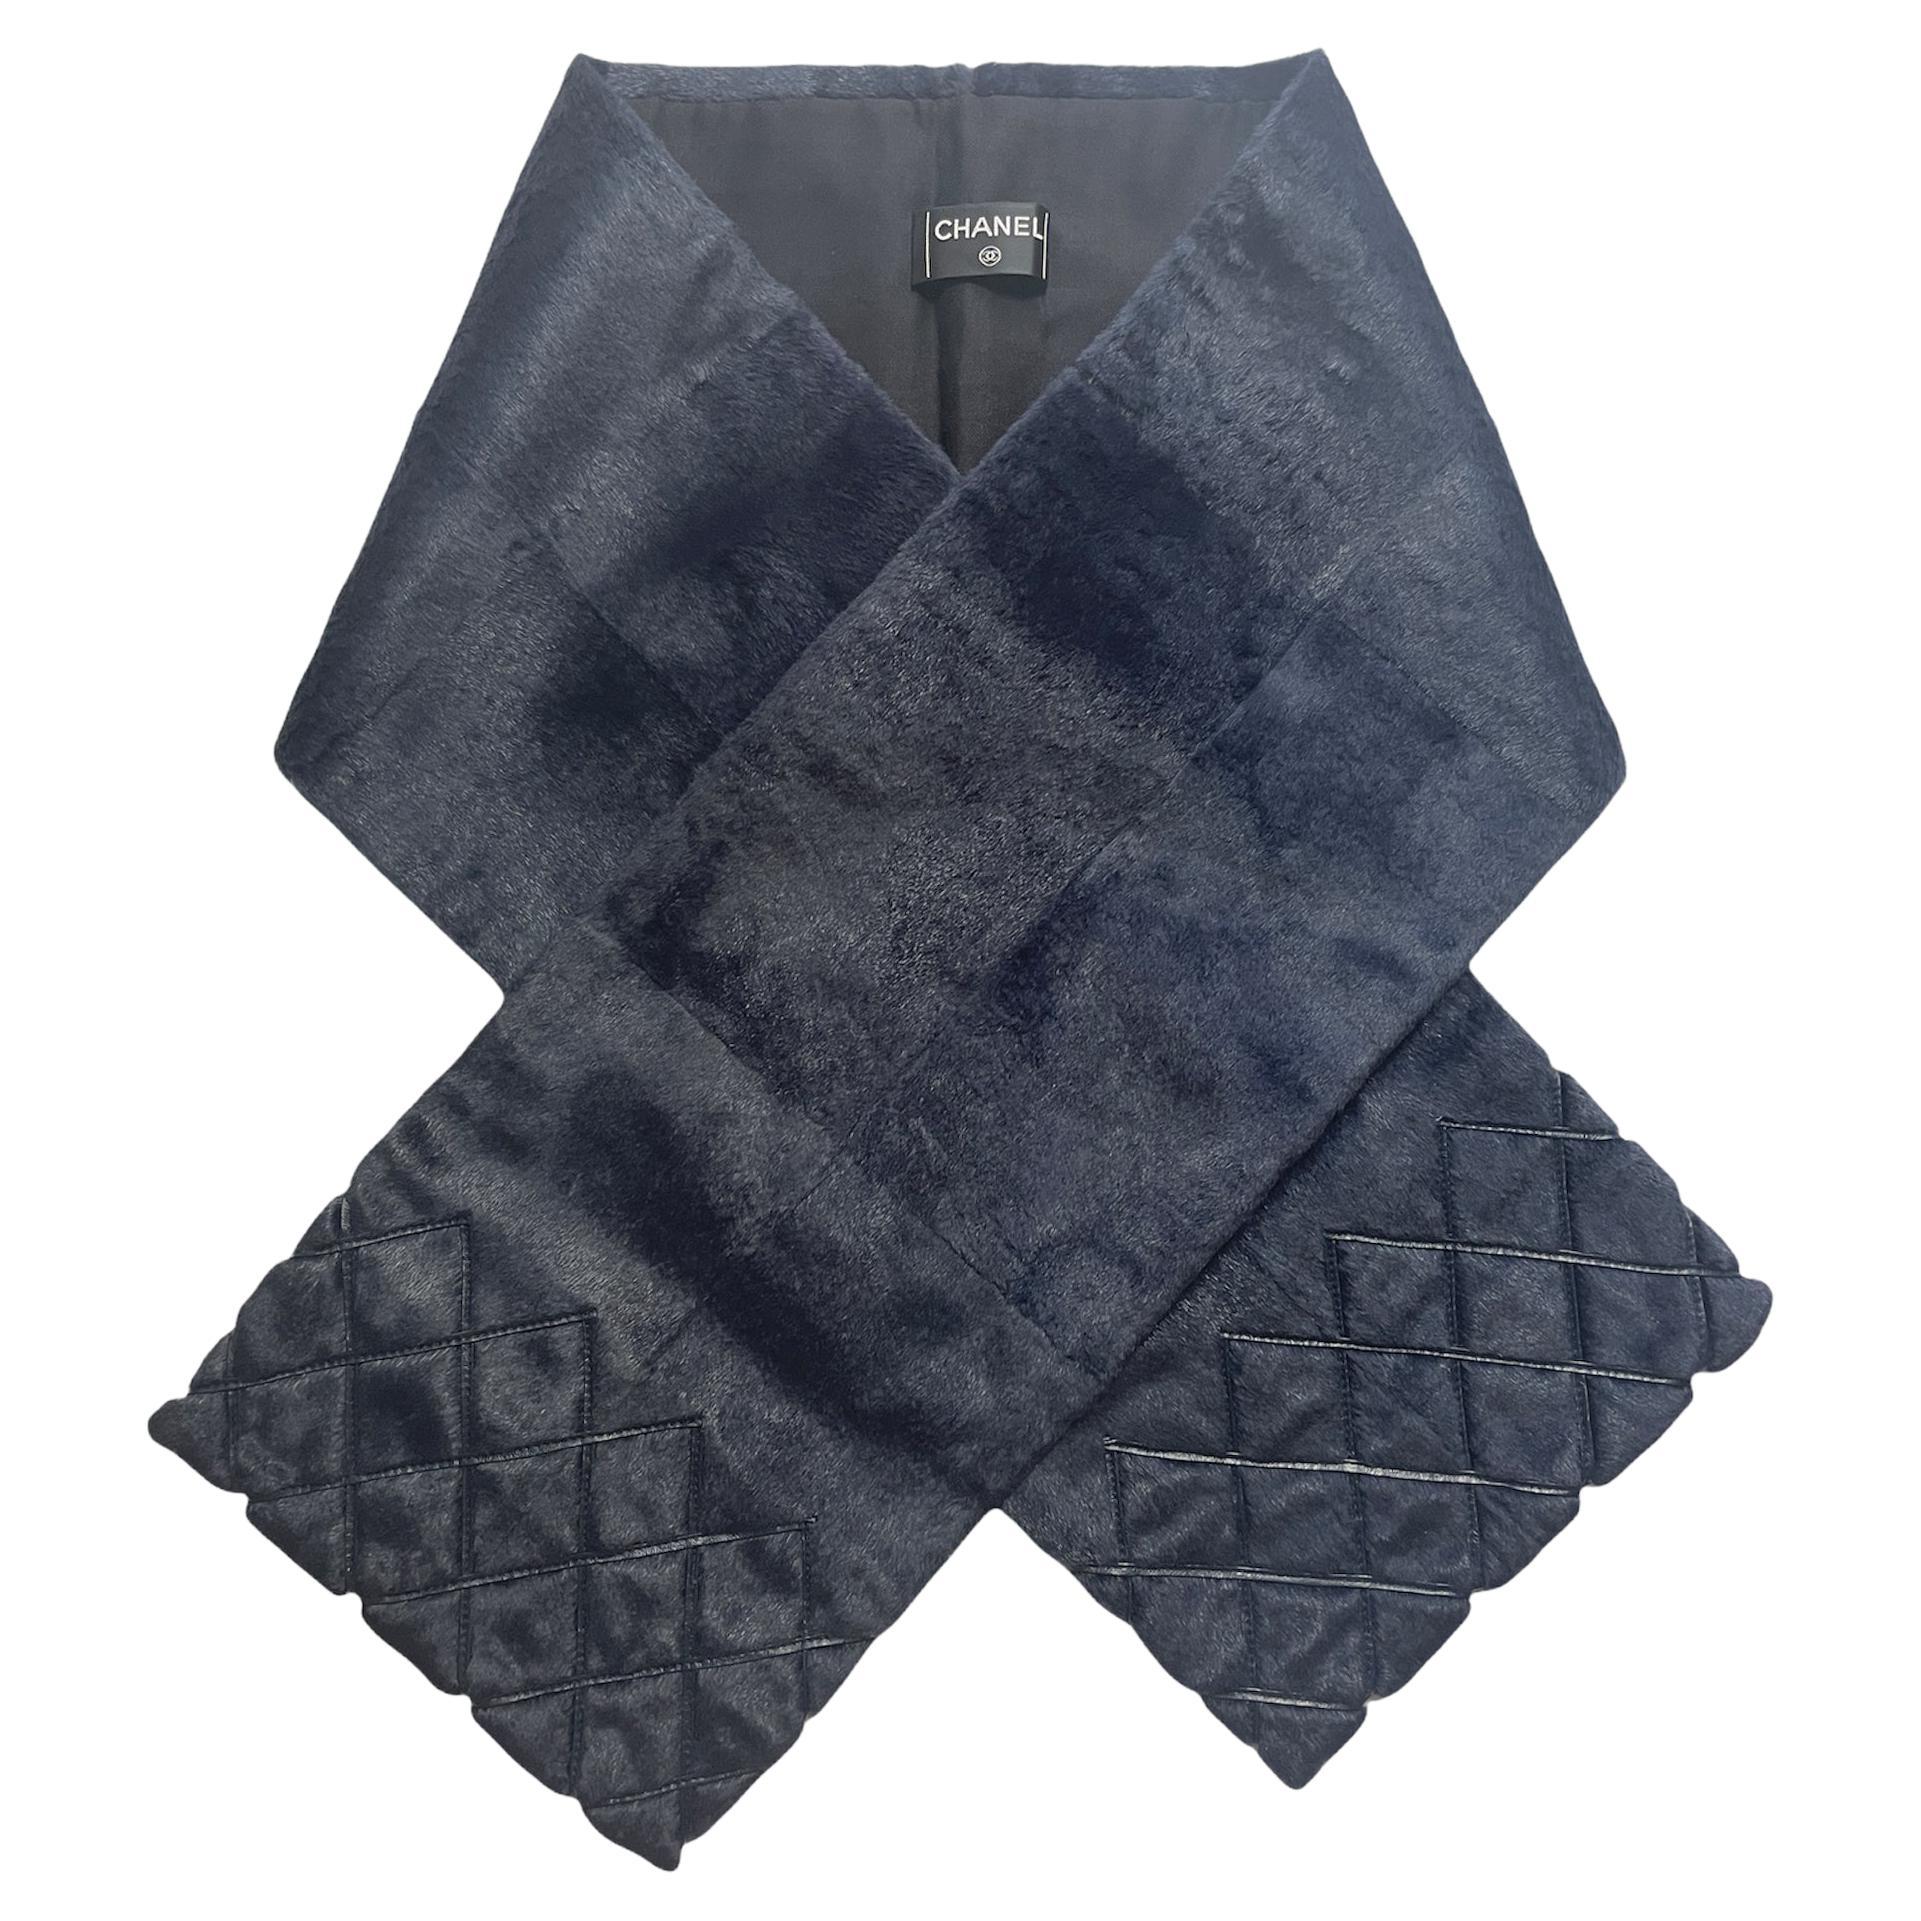 Chanel - Stitch by Stitch by Stitch by Leather Quilted en vente